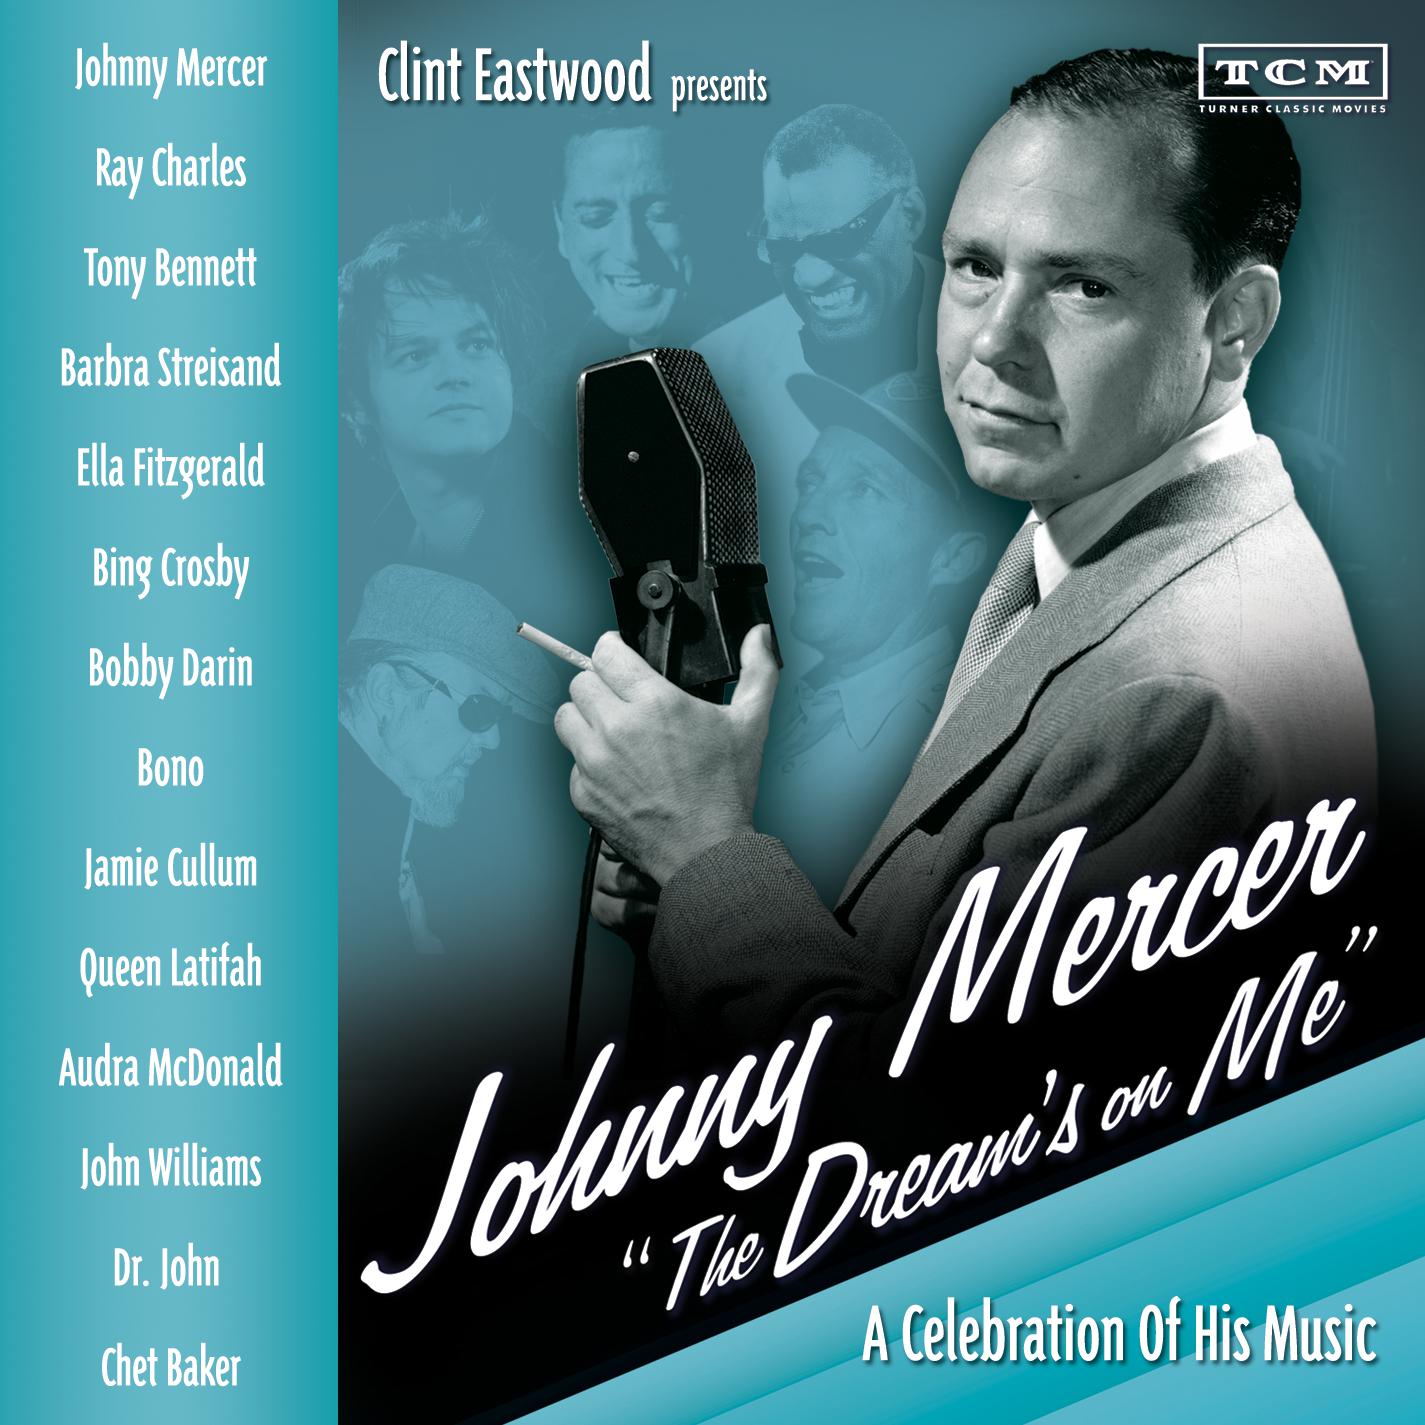 Clint Eastwood Presents: Johnny Mercer "The Dream's On Me" - A Celebration of His Music